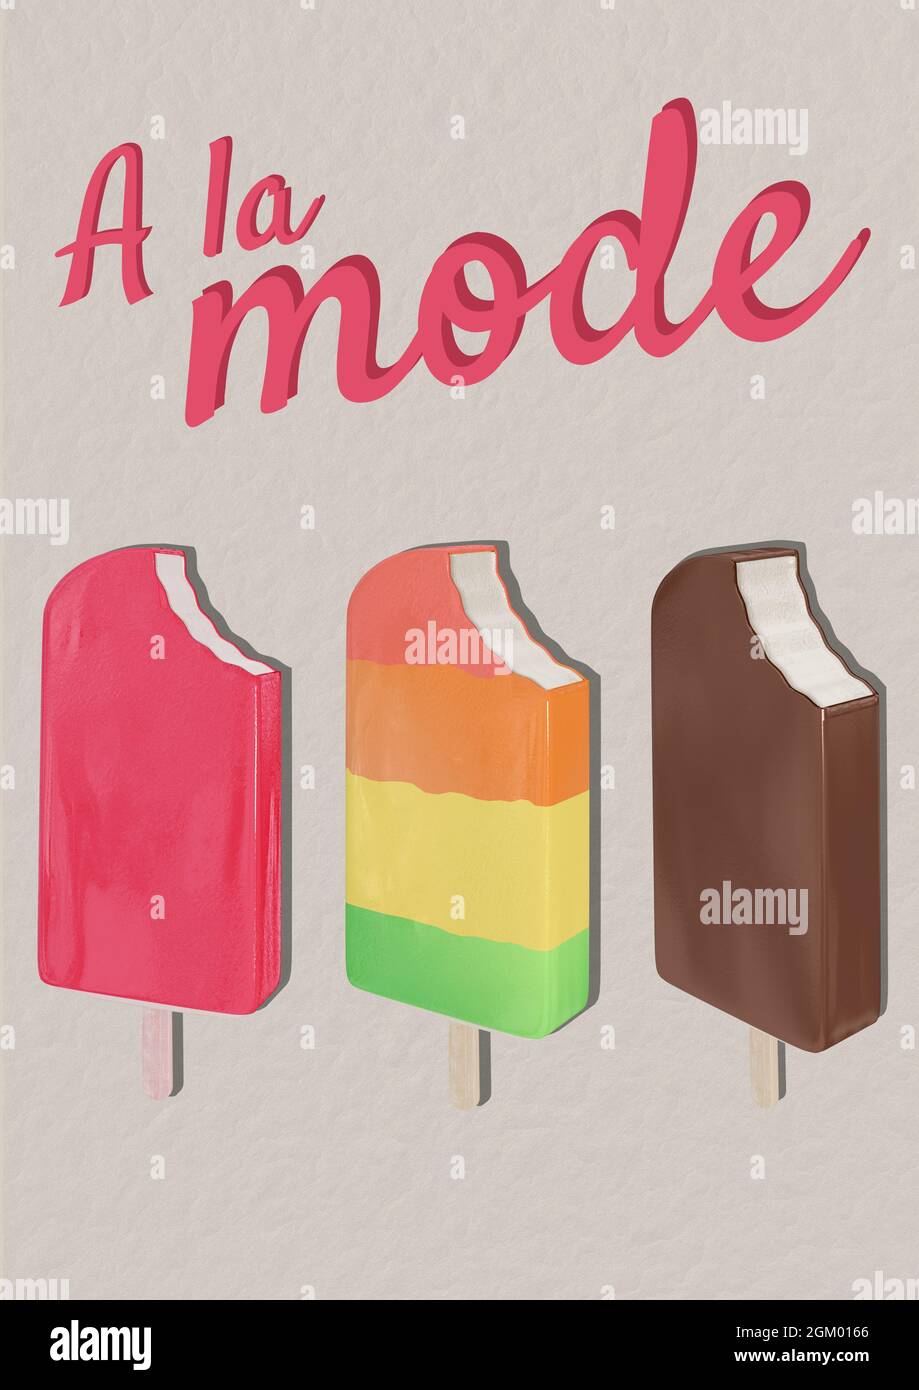 A la mode text with ice-cream icons against grey background Stock Photo